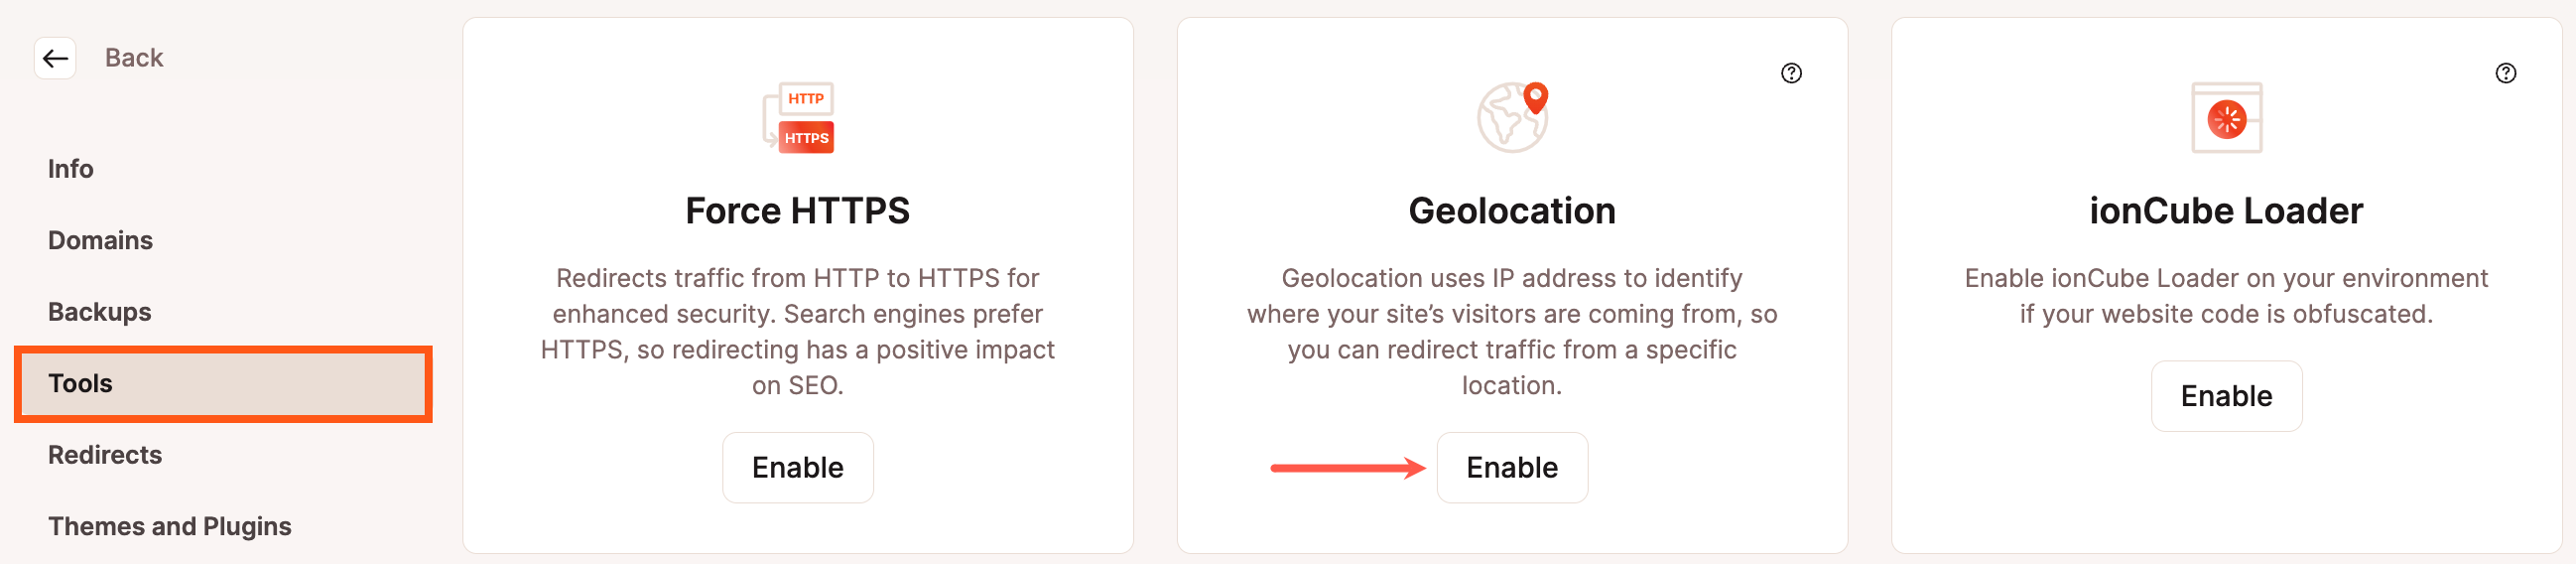 Geolocation can be enabled in the Tools section of MyKinsta.